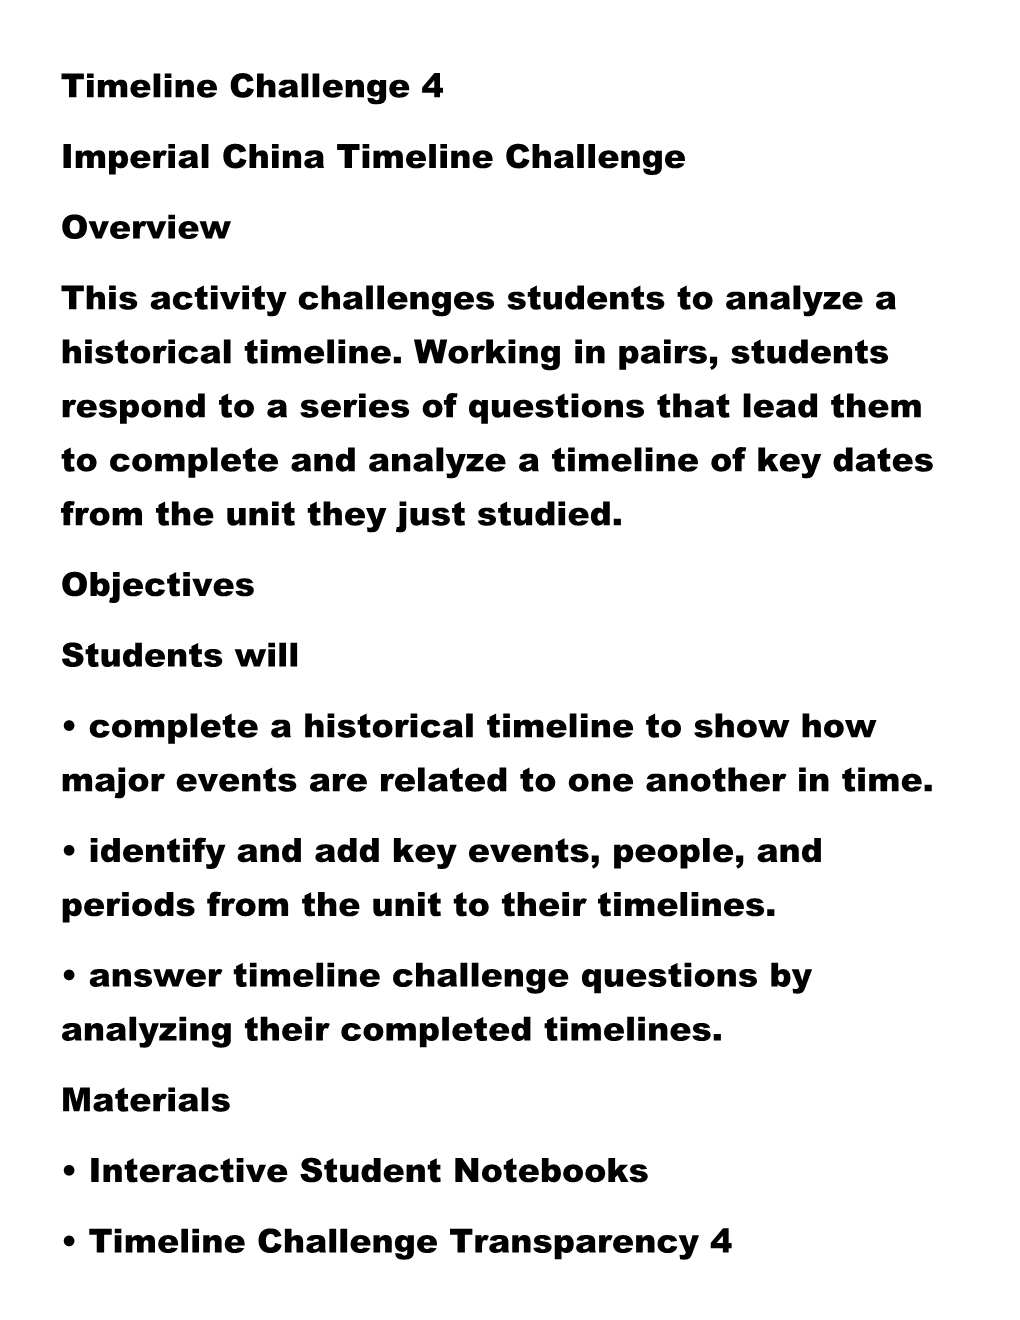 Imperial China Timeline Challenge